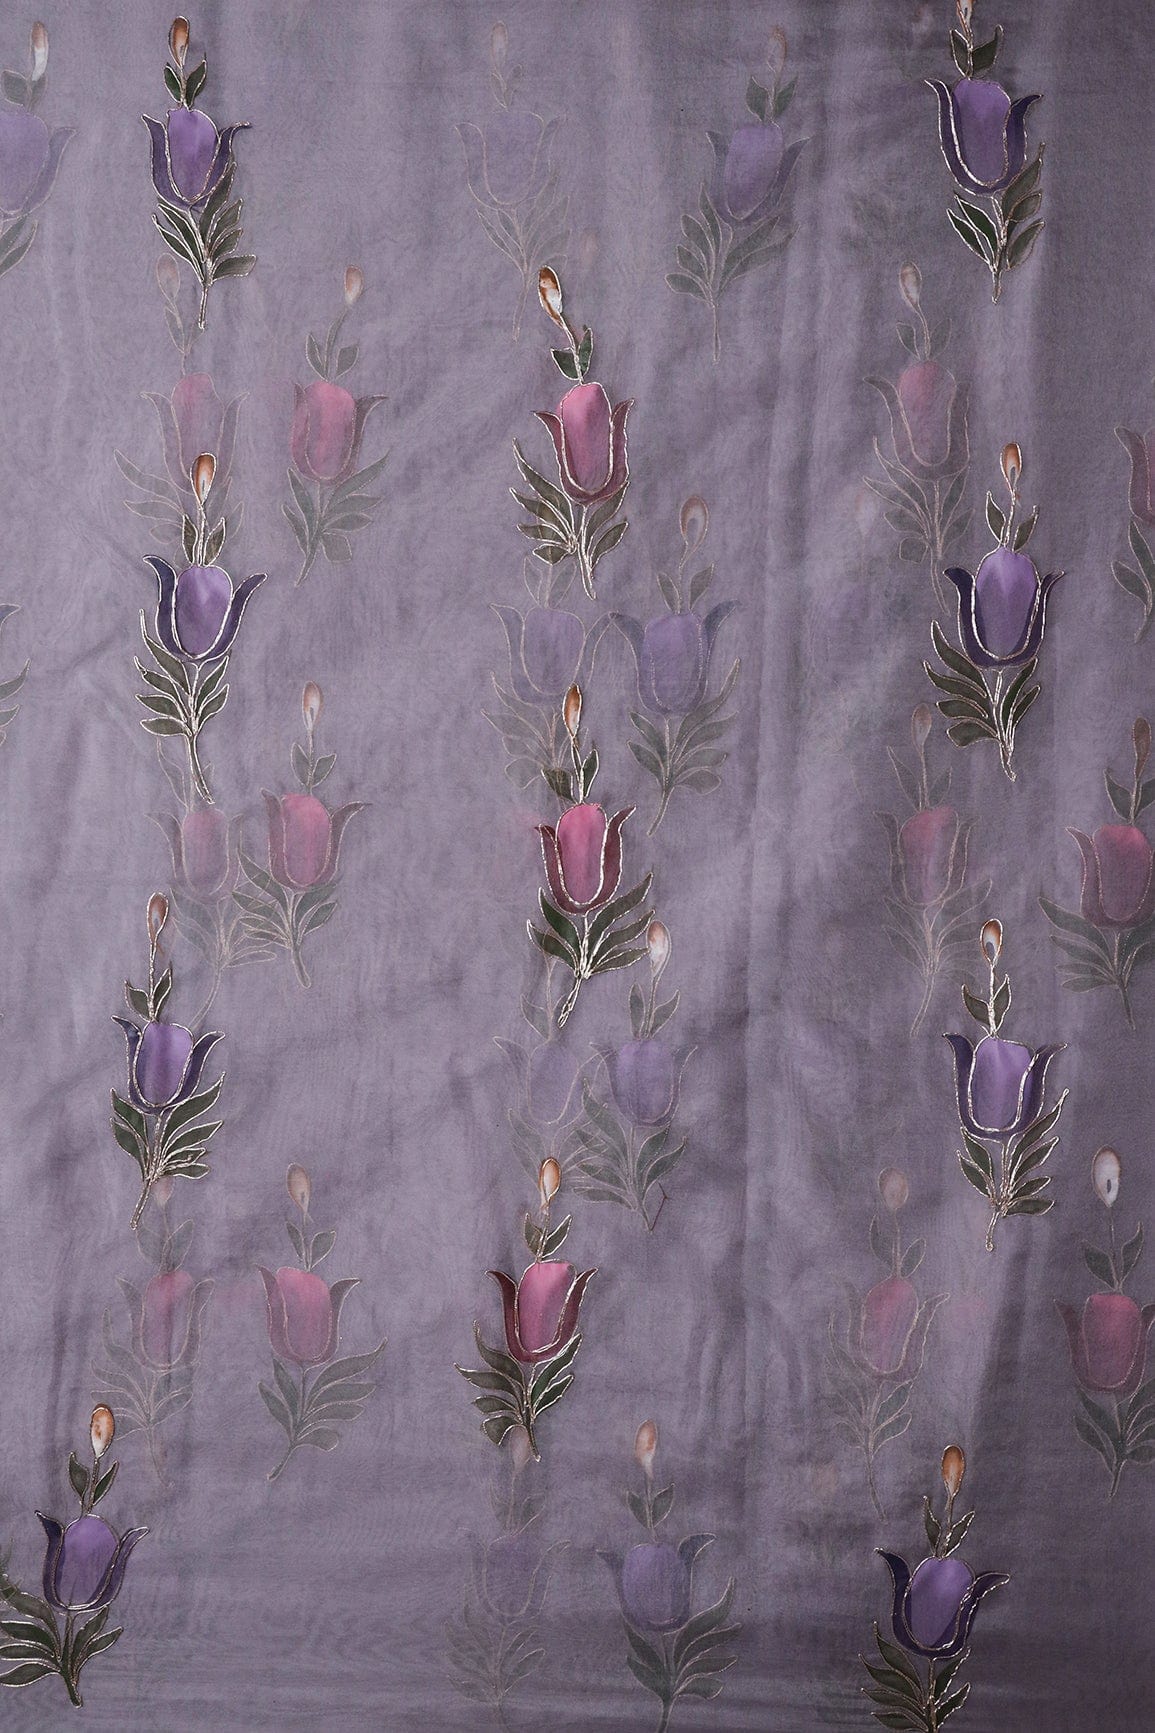 doeraa Embroidery Fabrics 1.75 Meter Cut Piece Of Beautiful Floral Hand Painted With Embroidery Work On Lavender Organza Fabric